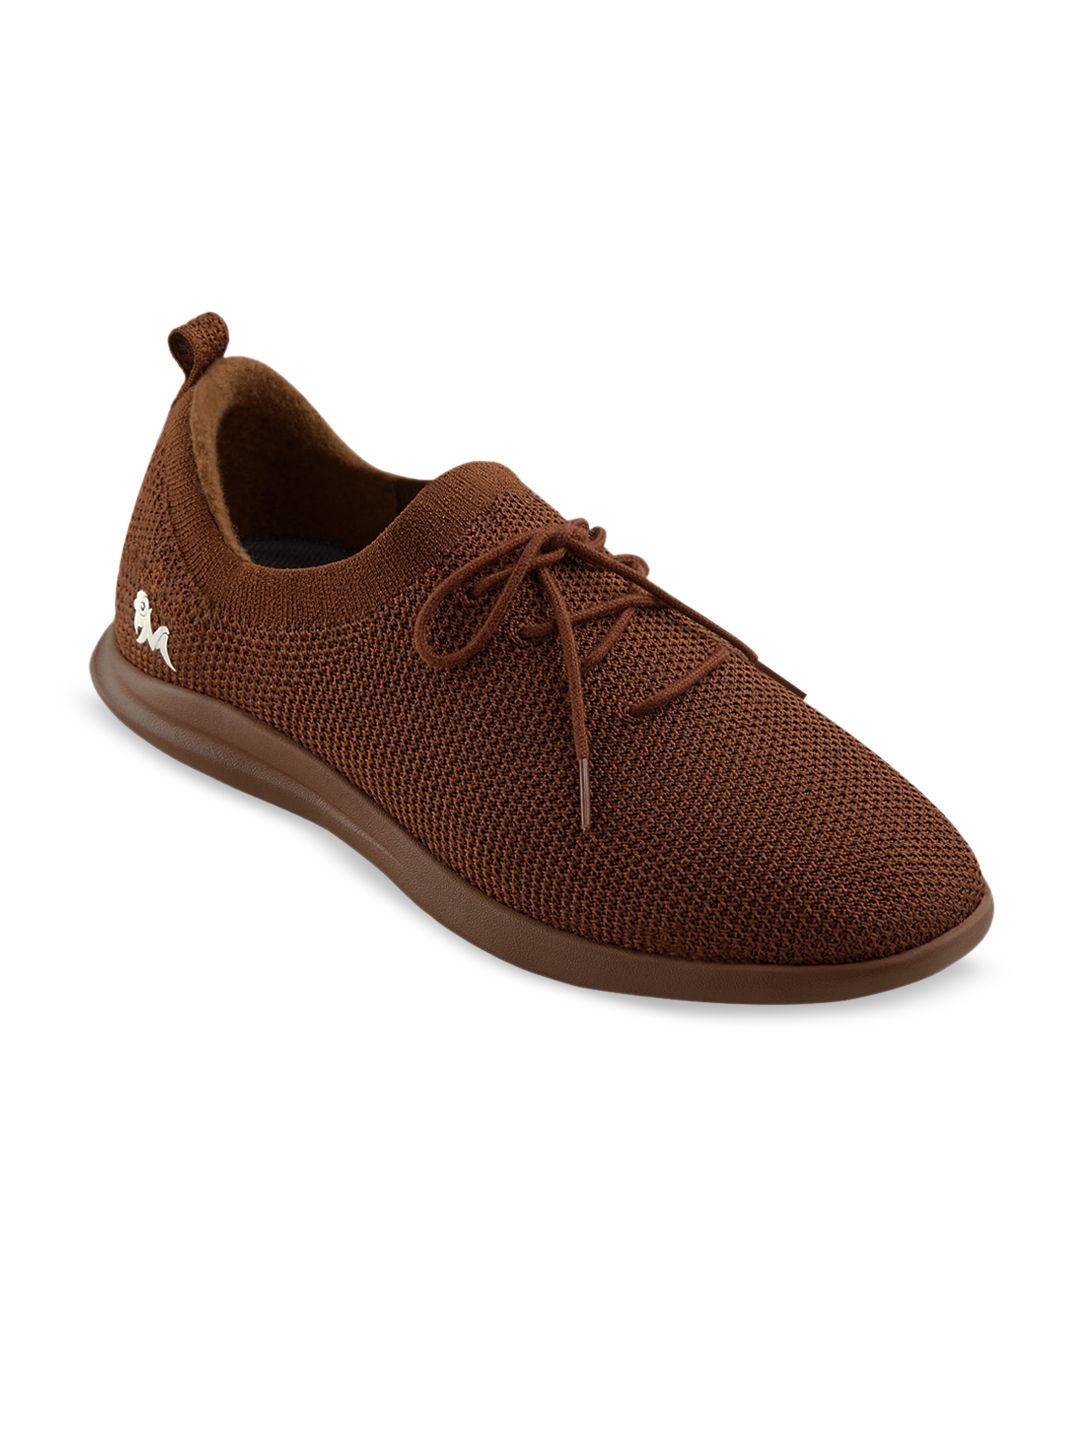 NEEMANS Unisex Brown Re-Live Knit Sneakers Price in India